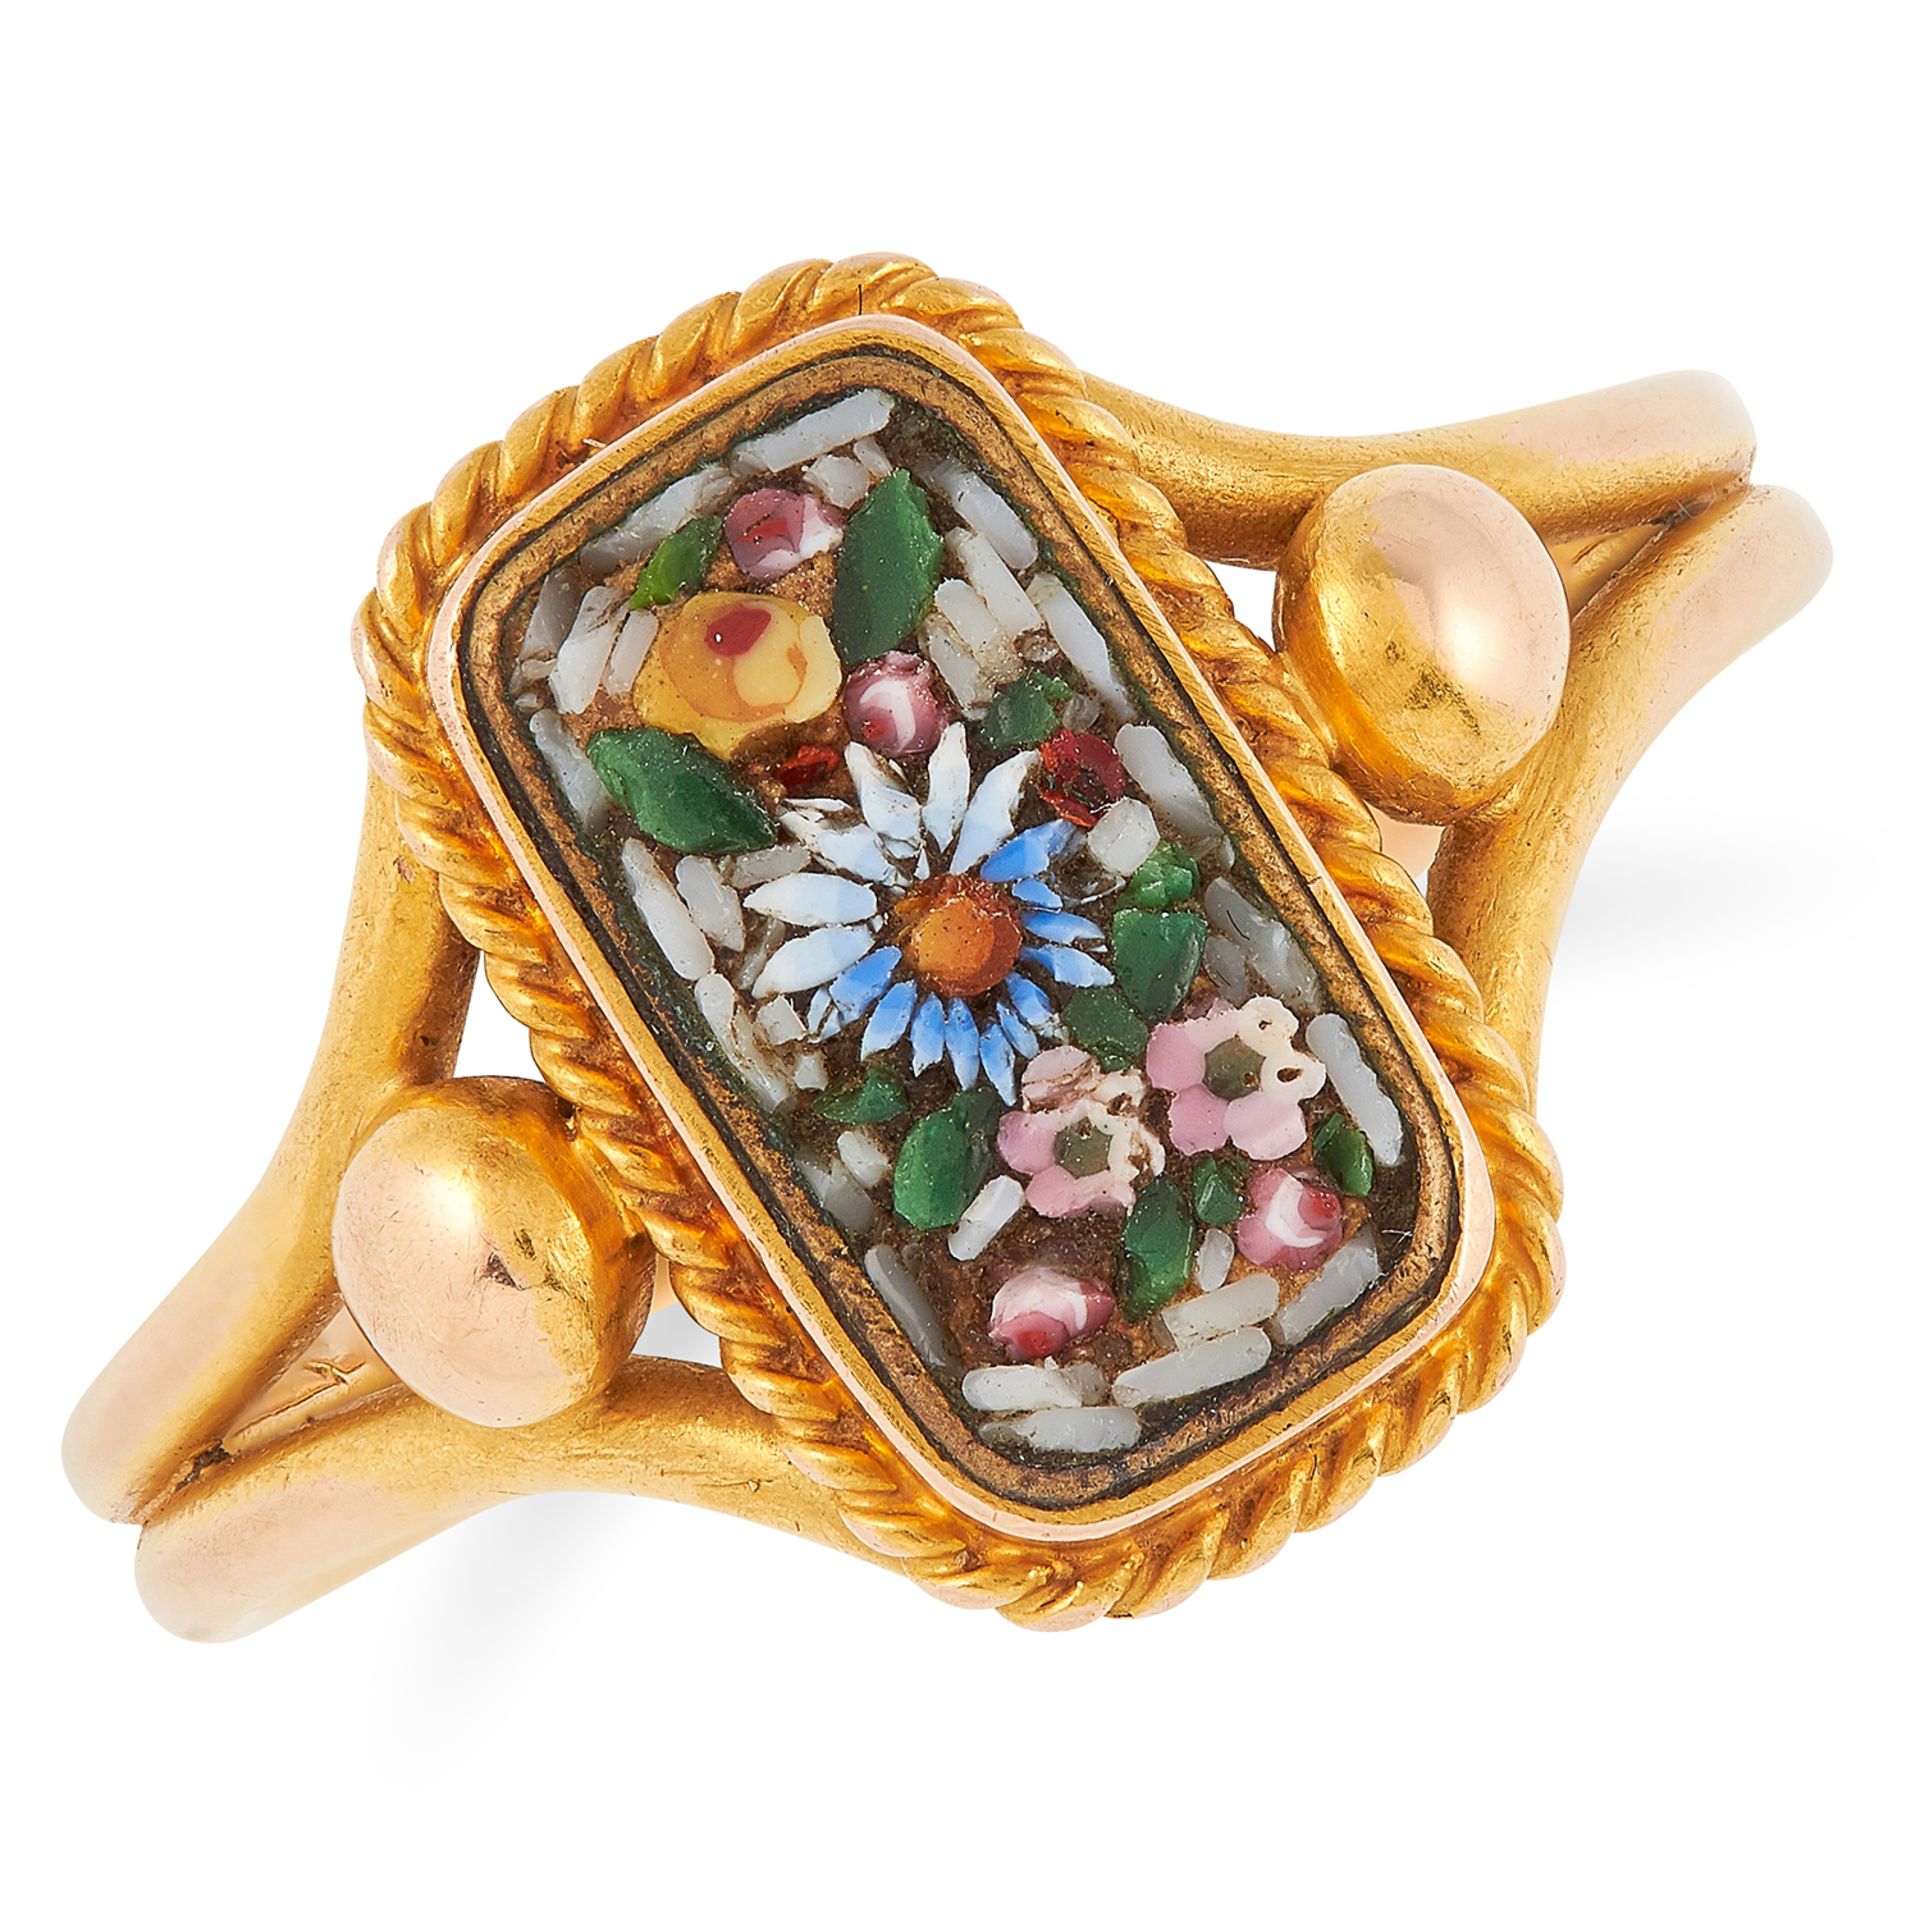 MICROMOSAIC RING in floral design, size N / 6.5, 4.3g.